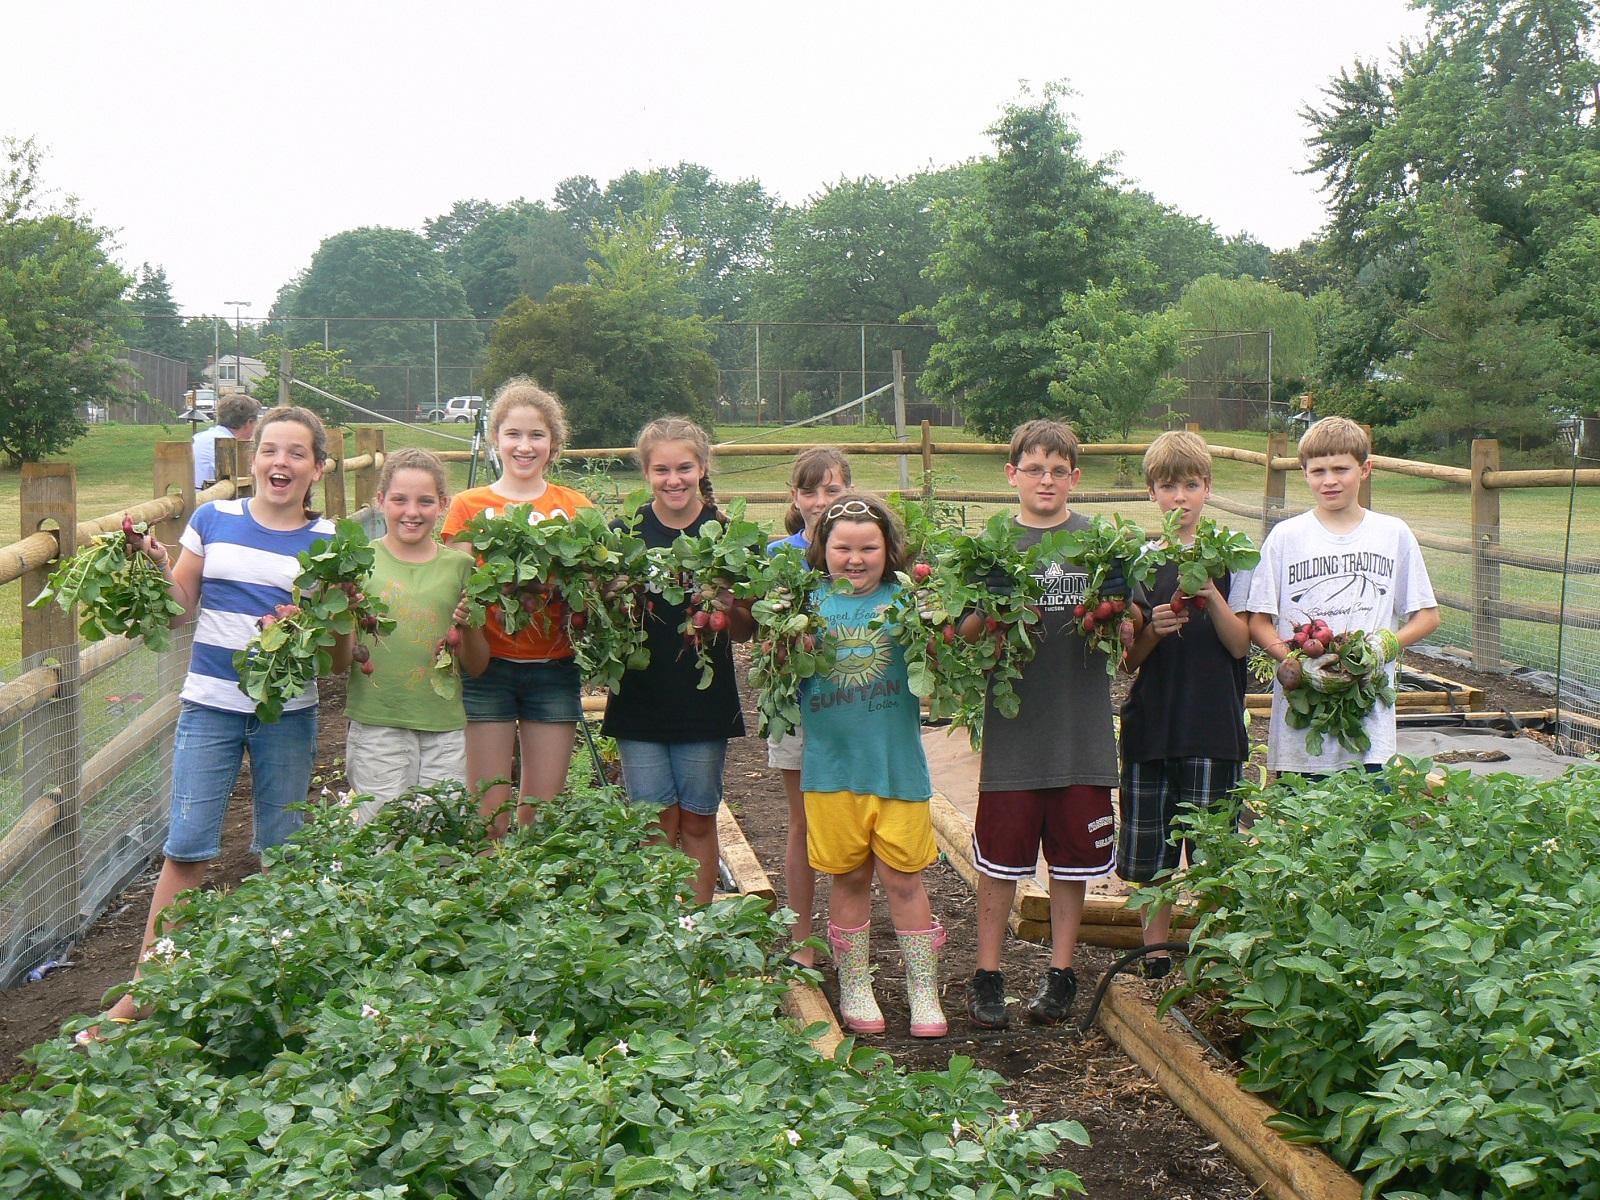 children proudly showing harvested crops from their garden